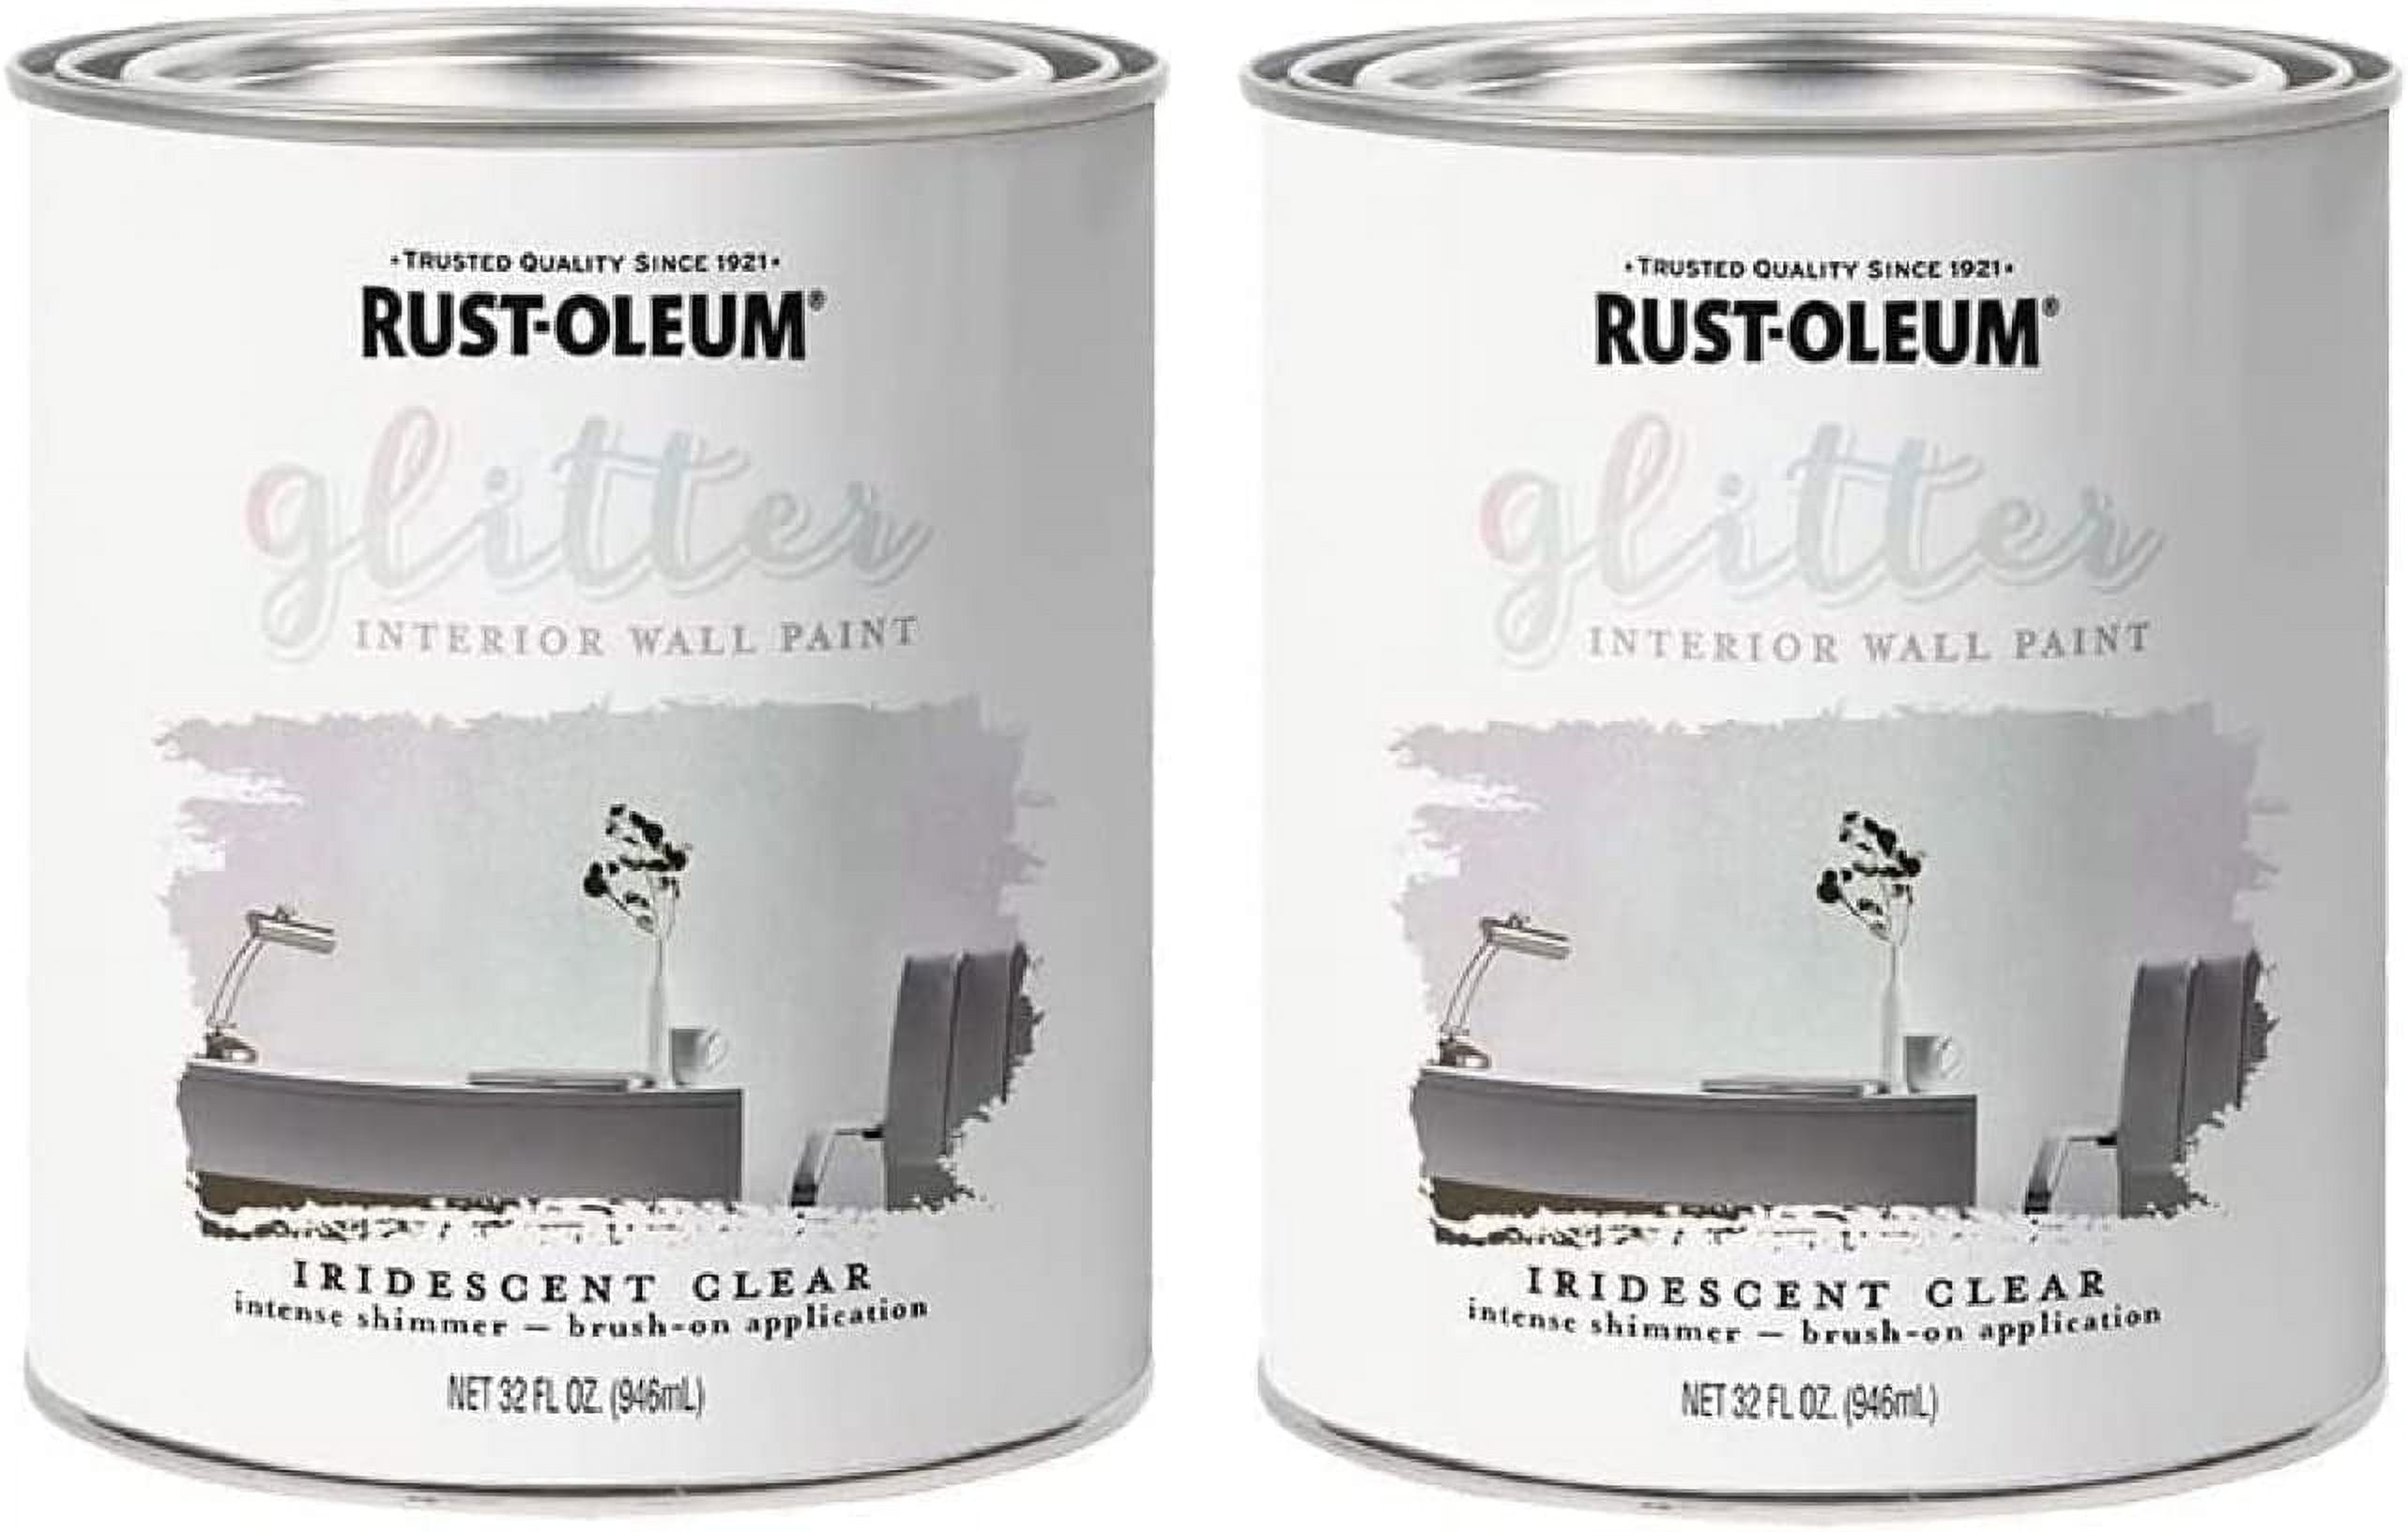 Rustoleum Glitter Clear does not have glitter in it! 